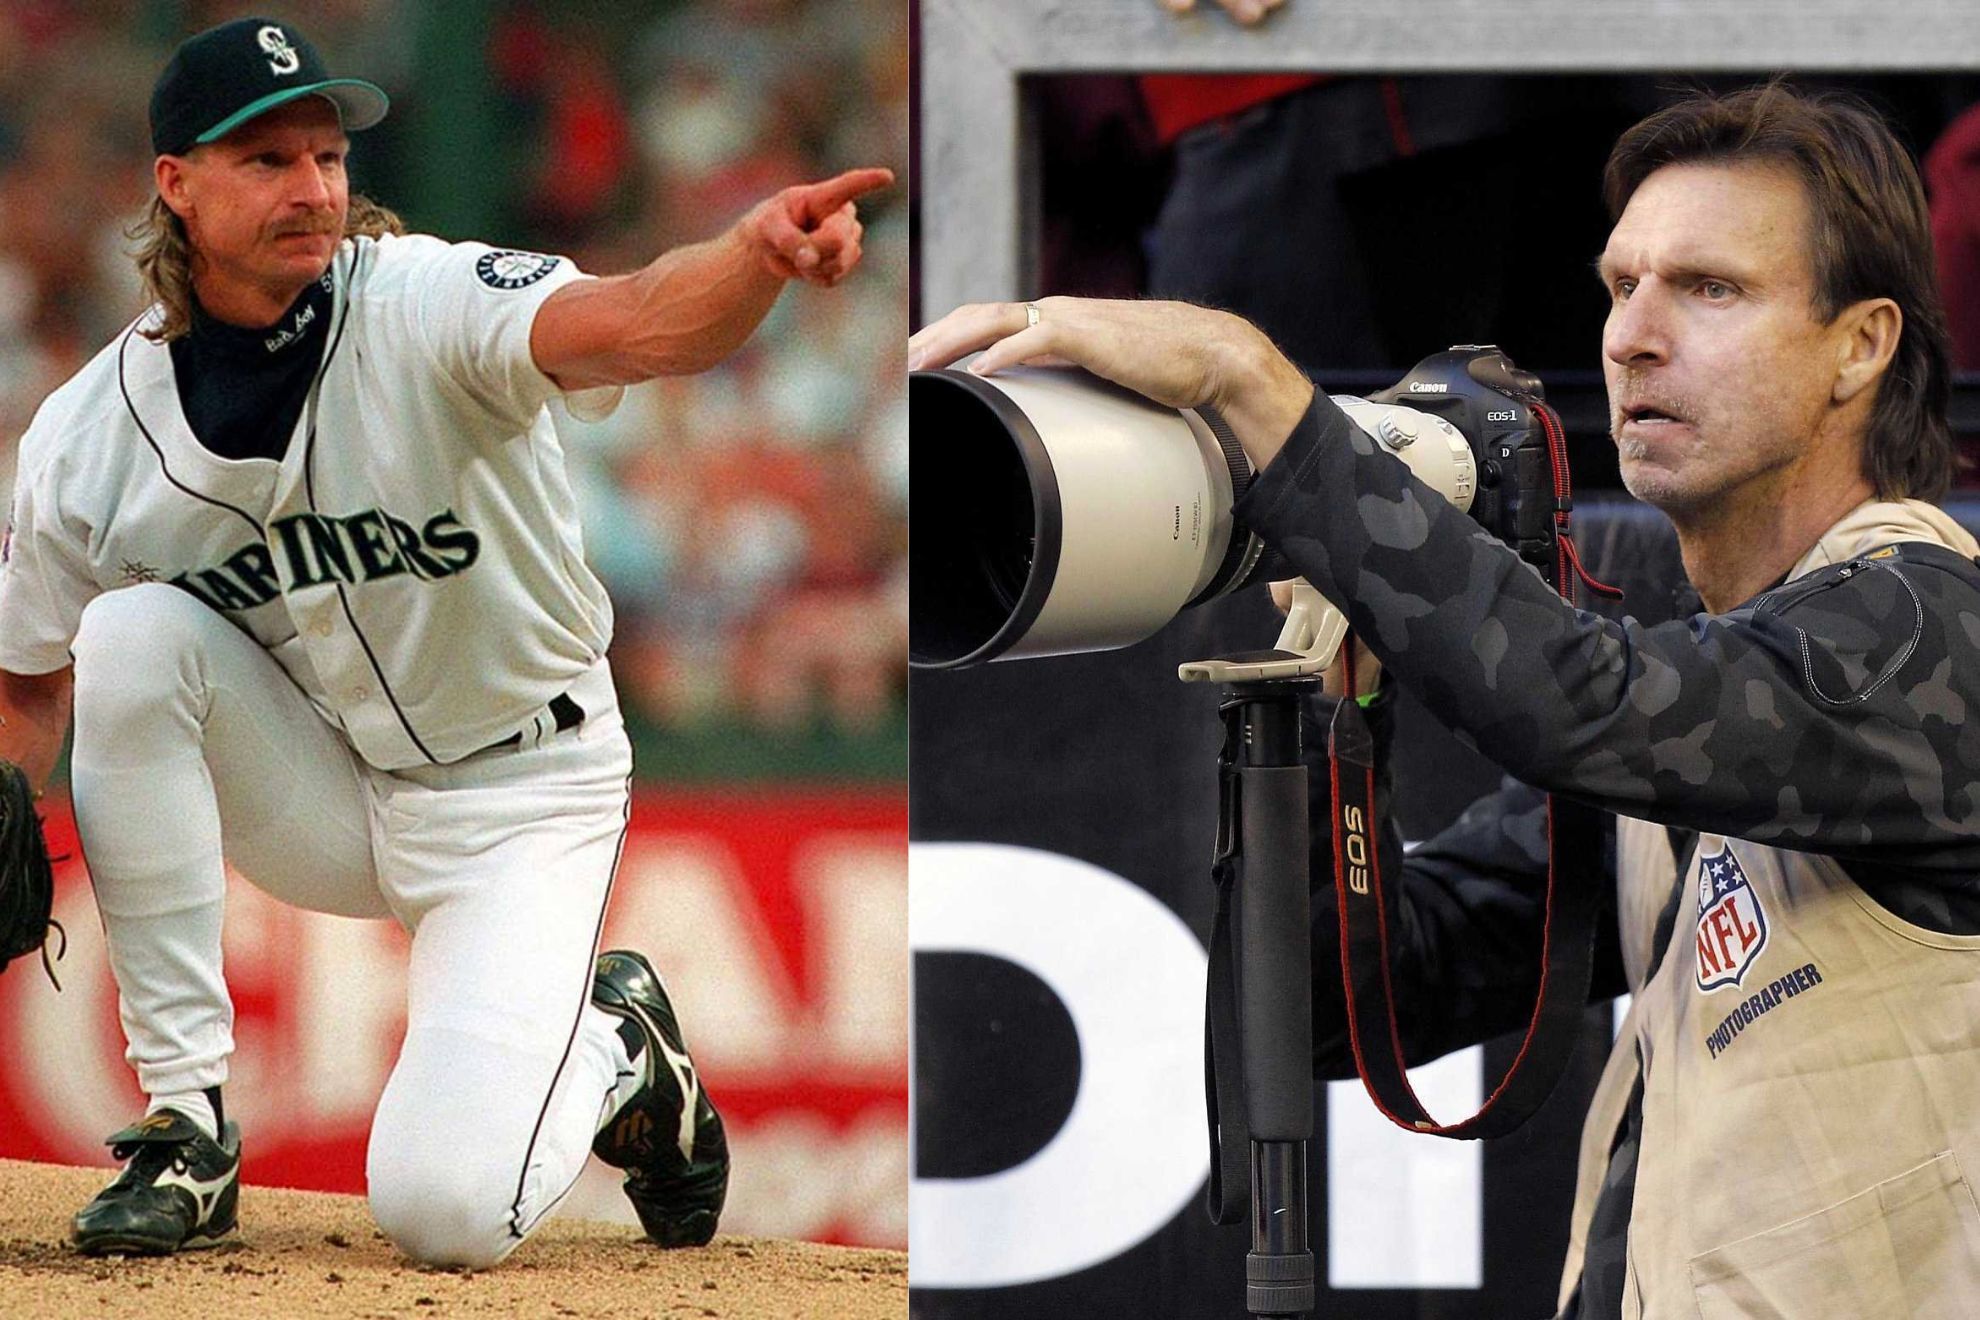 Randy Johnson is known as one of the best pitchers of all time. Now, he's a professional photographer. -AP